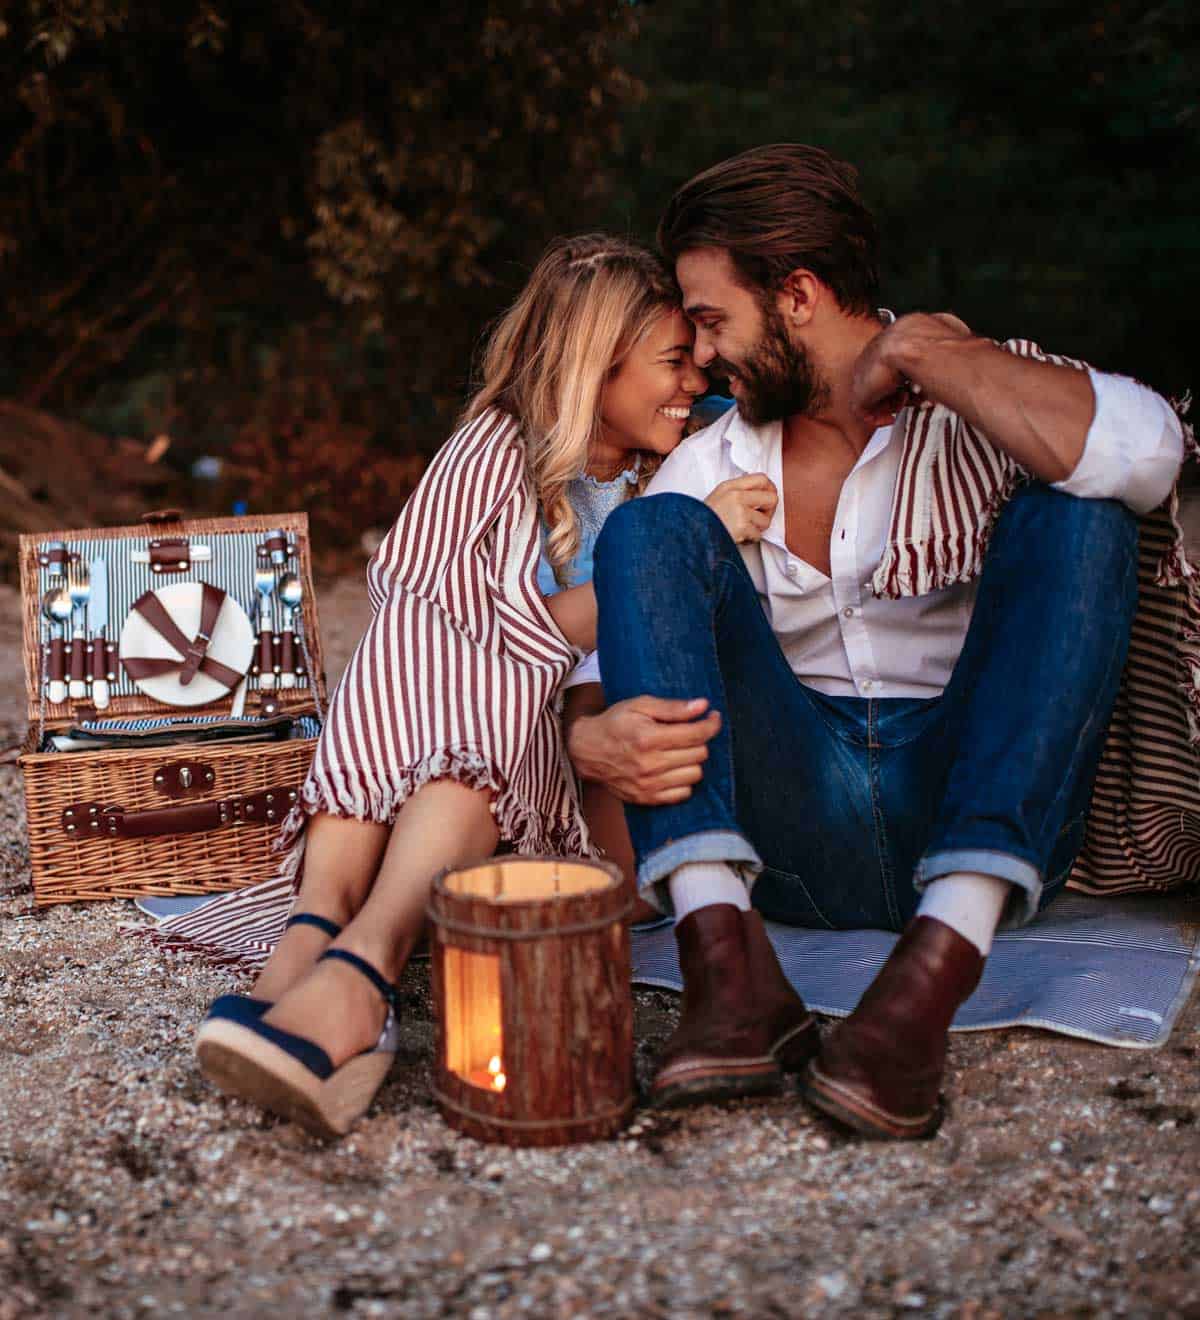 A couple is sitting on a picnic blanket cuddling with a picnic basket behind them.